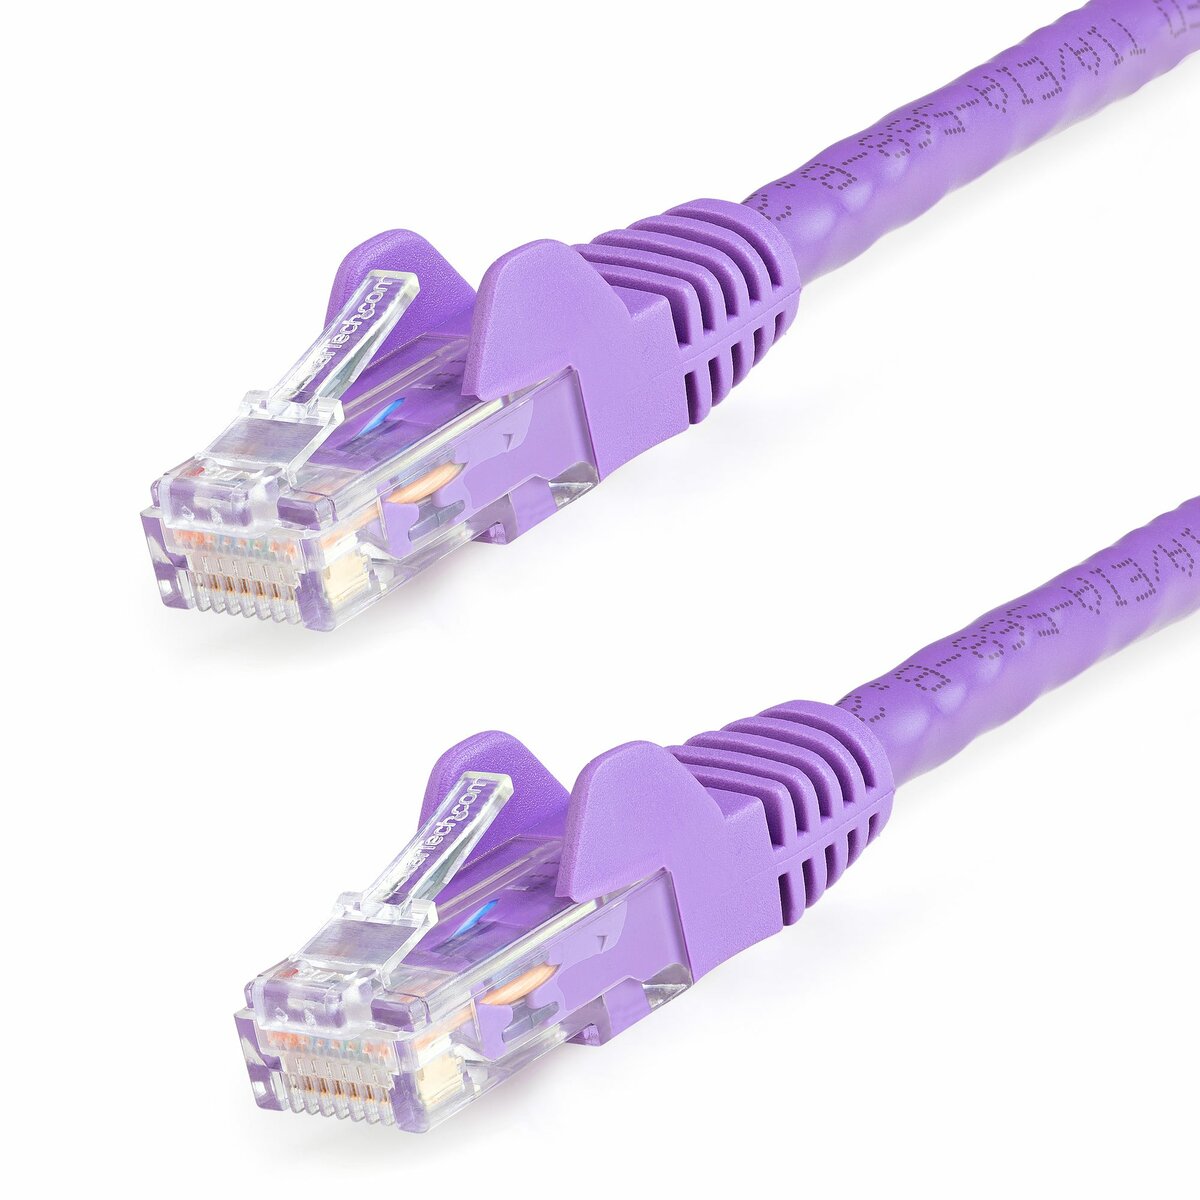 5m Green Home Office Ethernet Cable Cat6 RJ45 Network Patchlead 100% Copper 